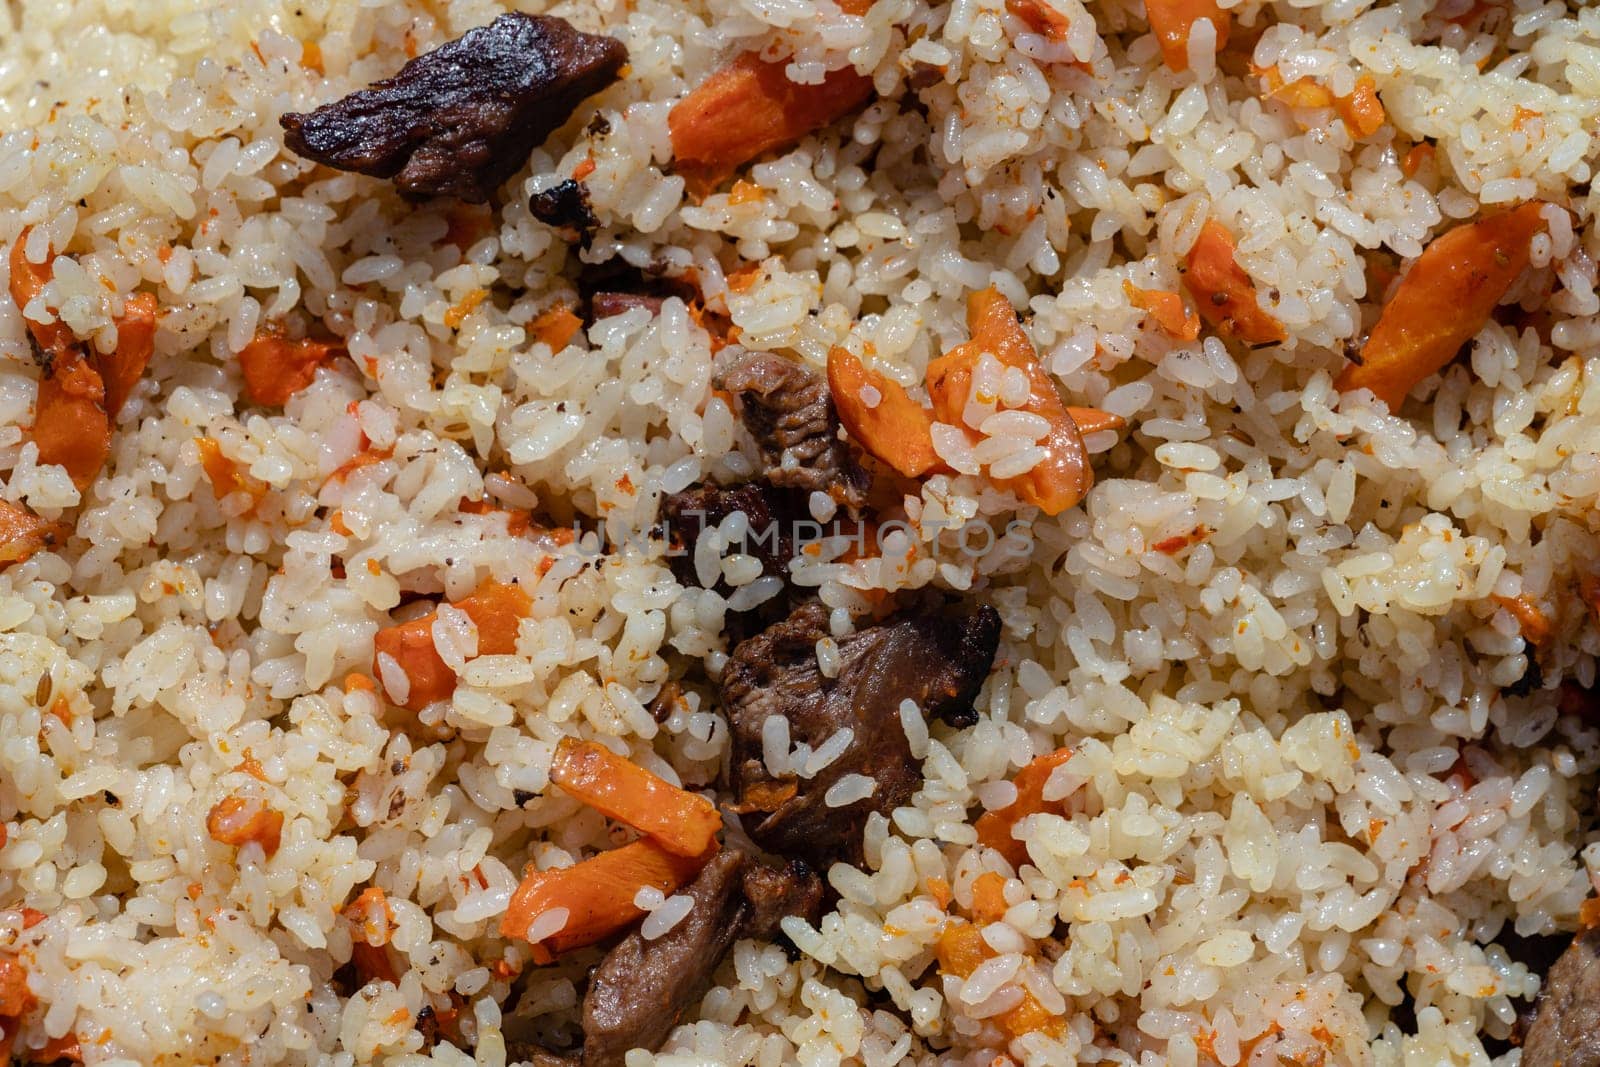 Asian culinary dish pilaf. Ingredients: rice with slices of meat, fat and vegetables carrot, garlic by Alexander-Piragis